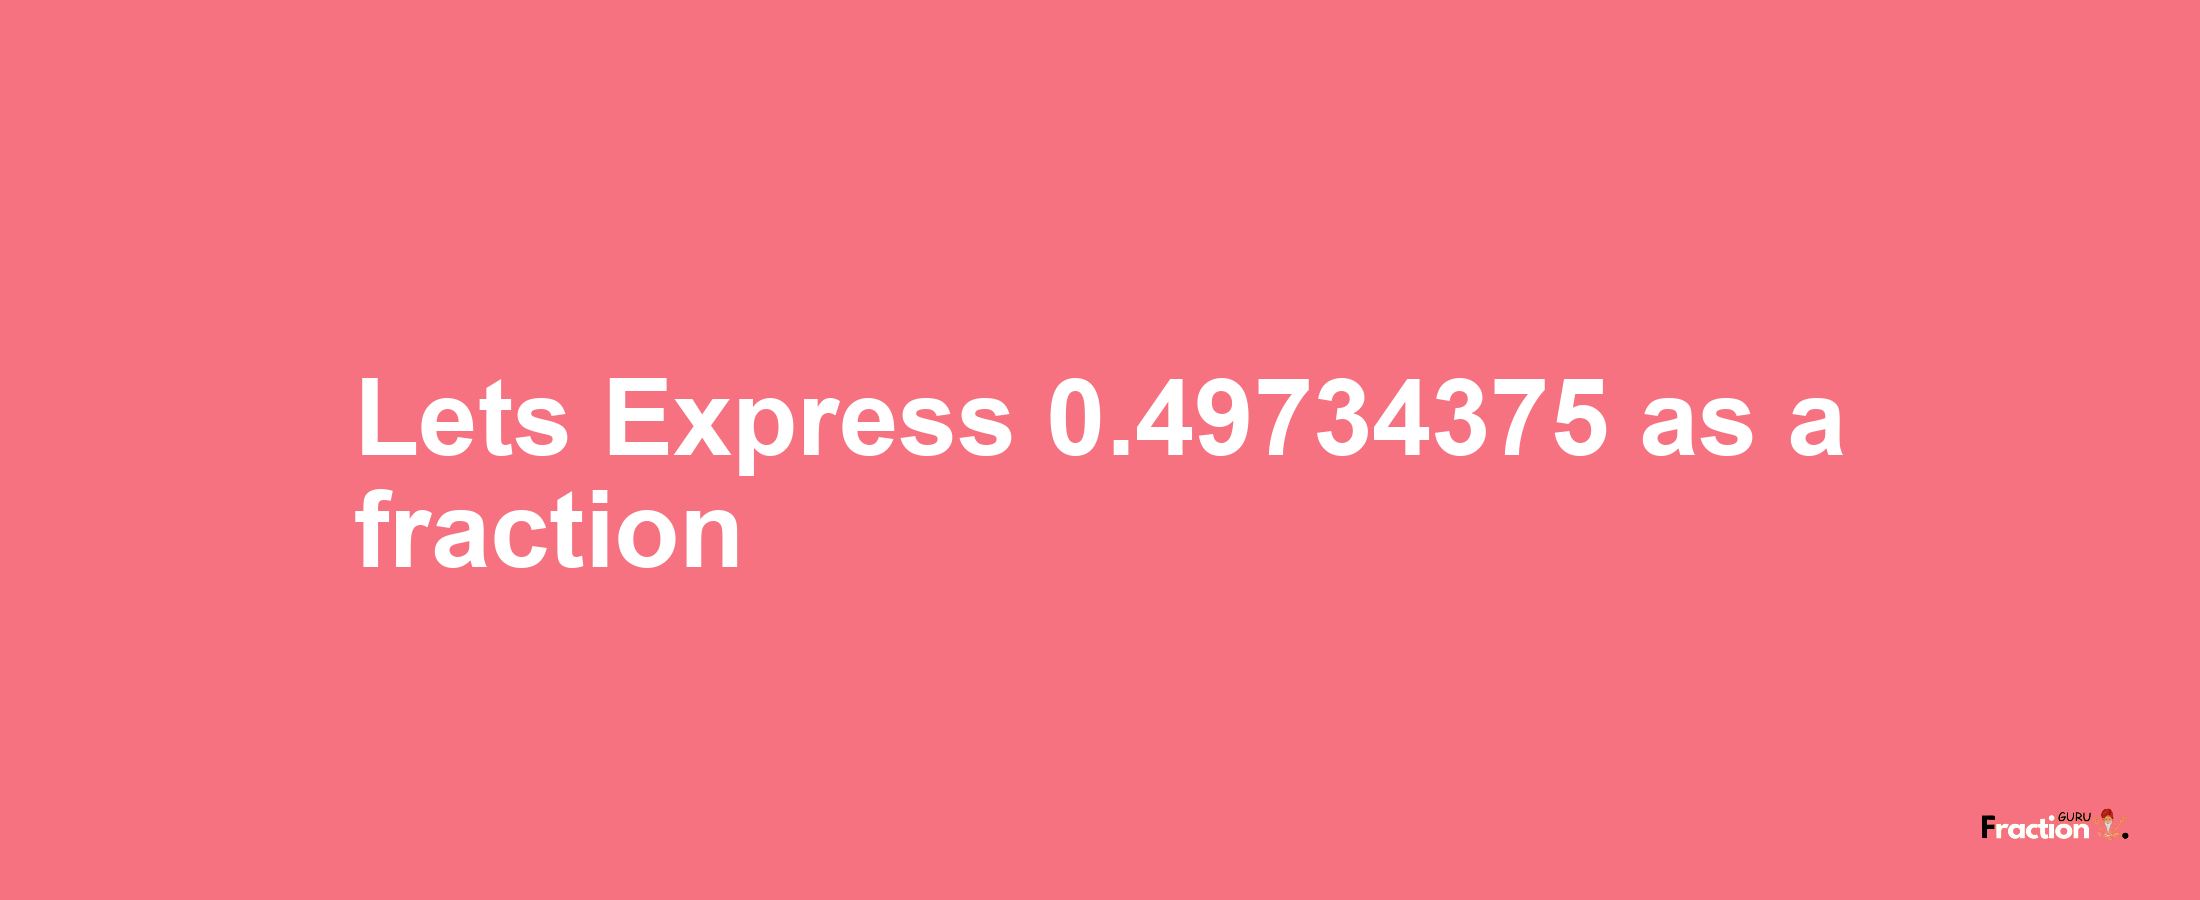 Lets Express 0.49734375 as afraction